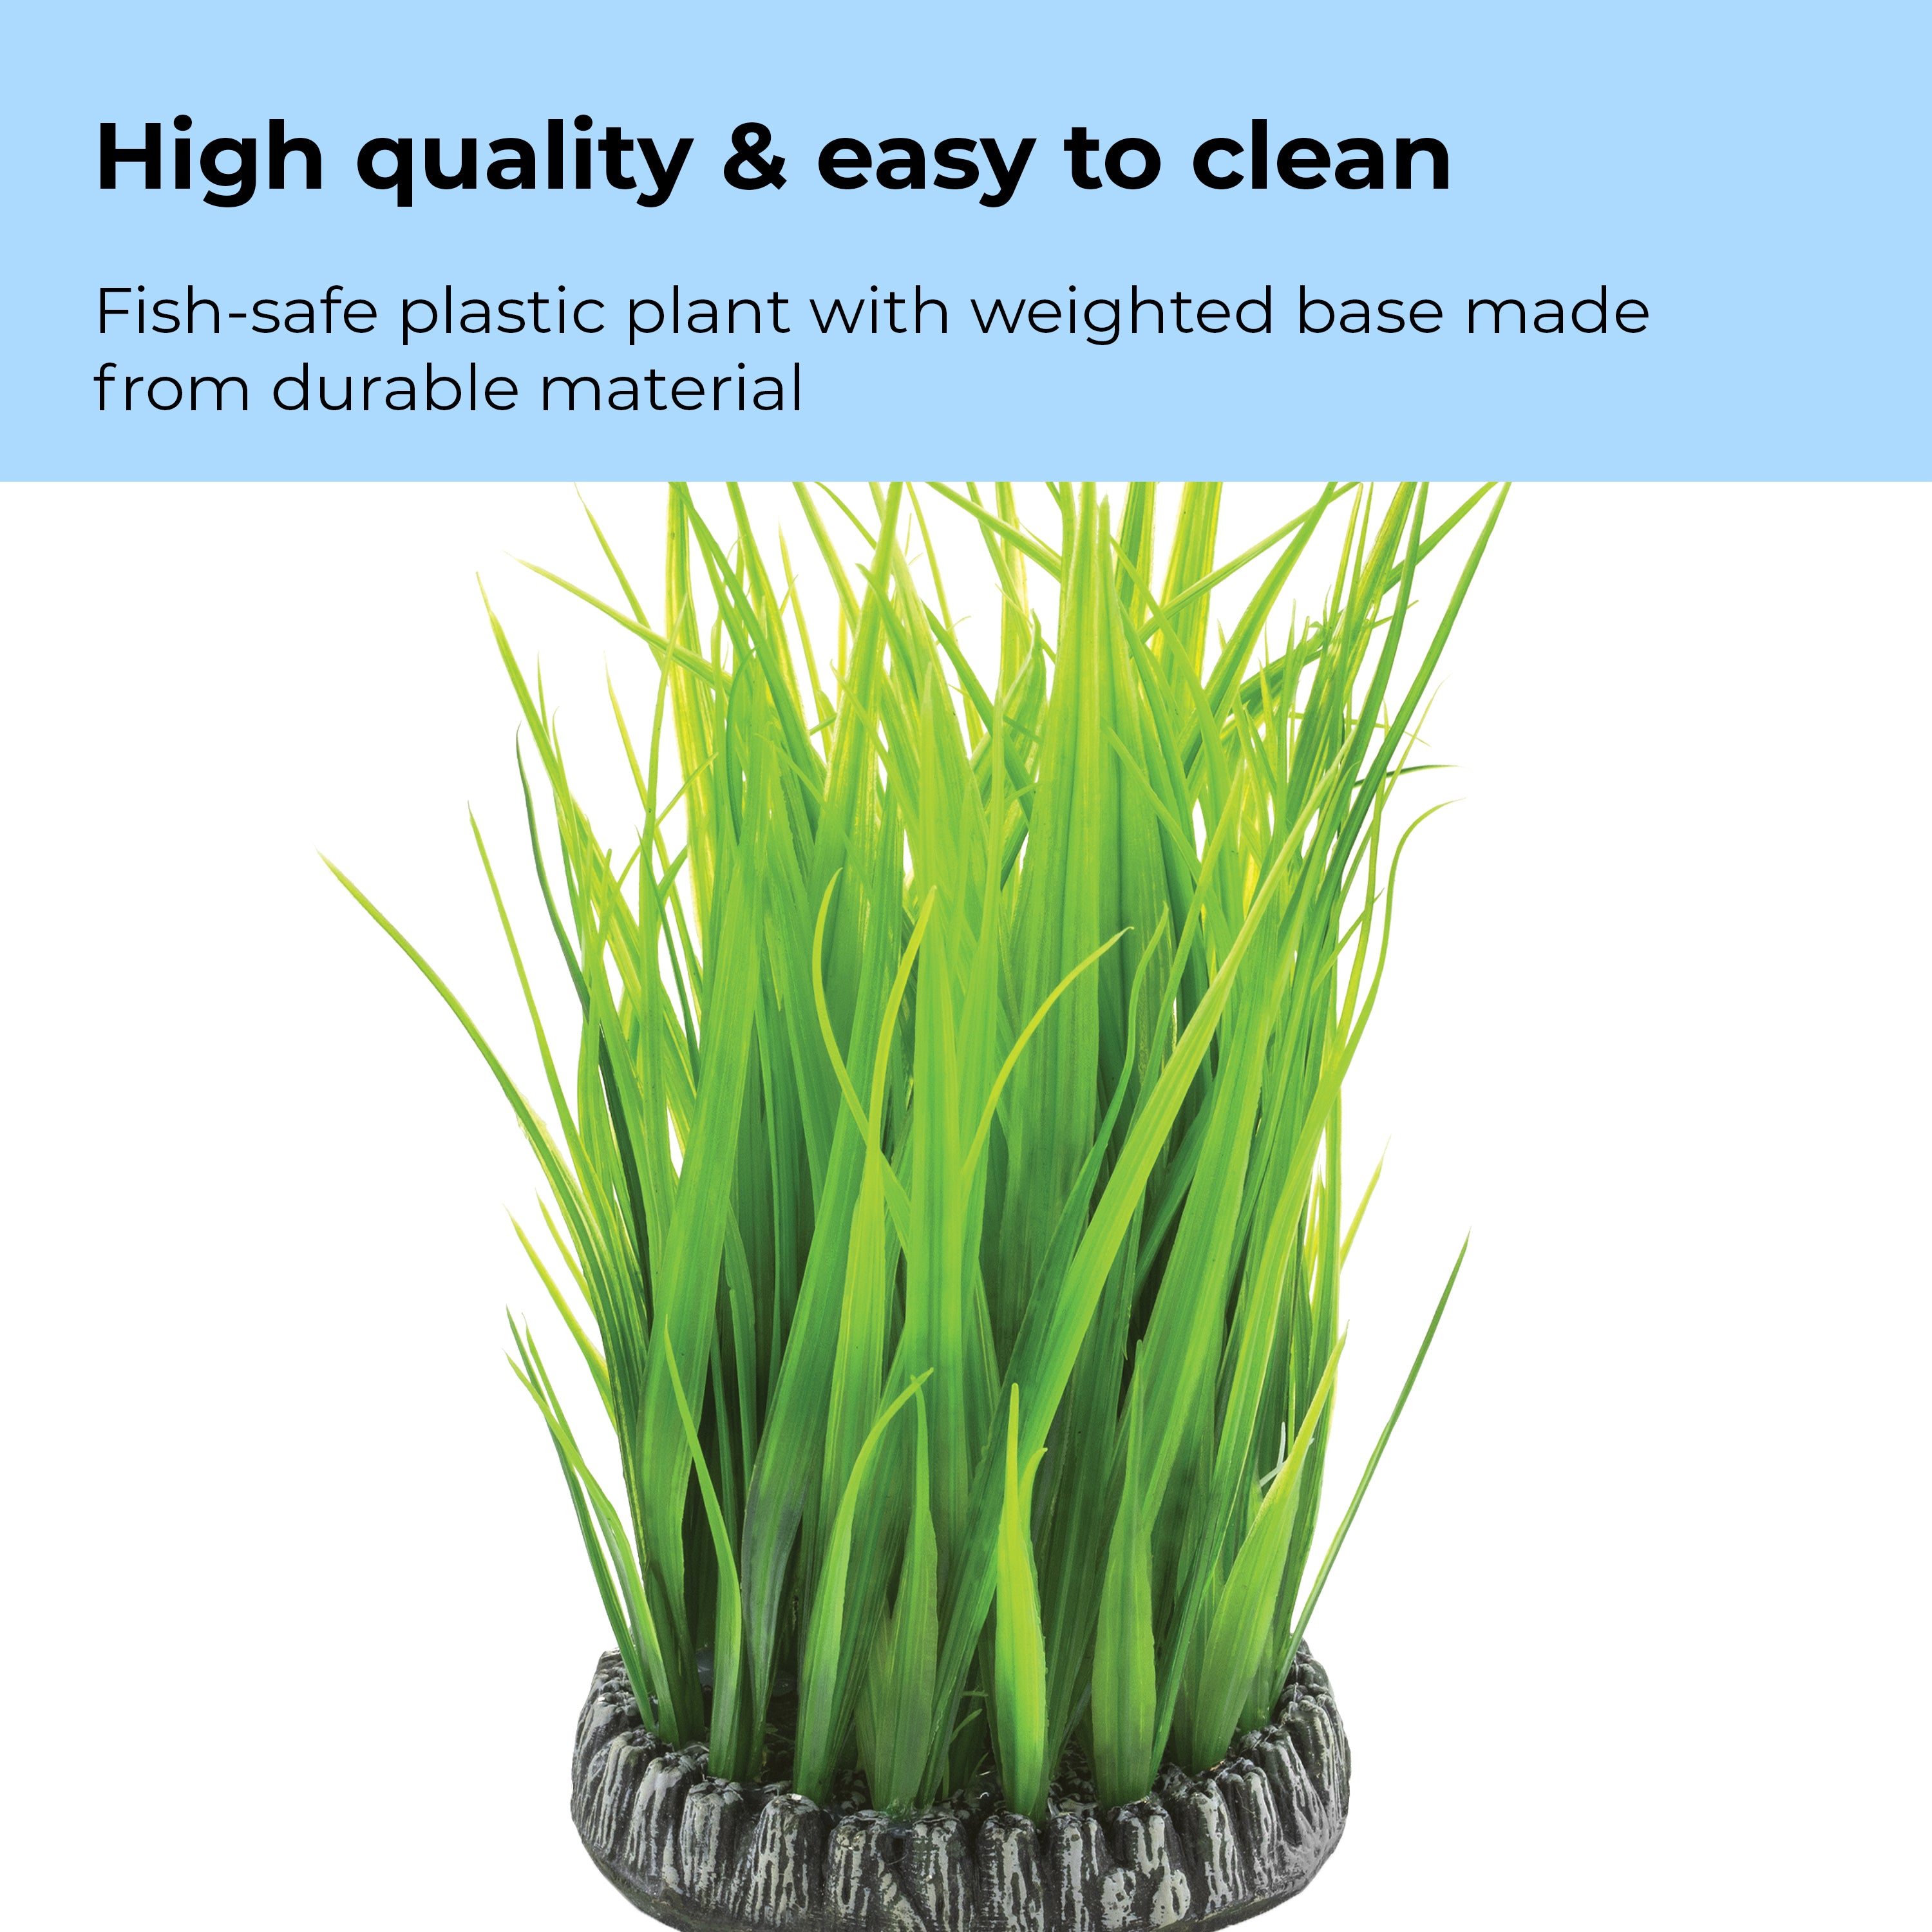 Medium Grass Ring durable & easy to clean